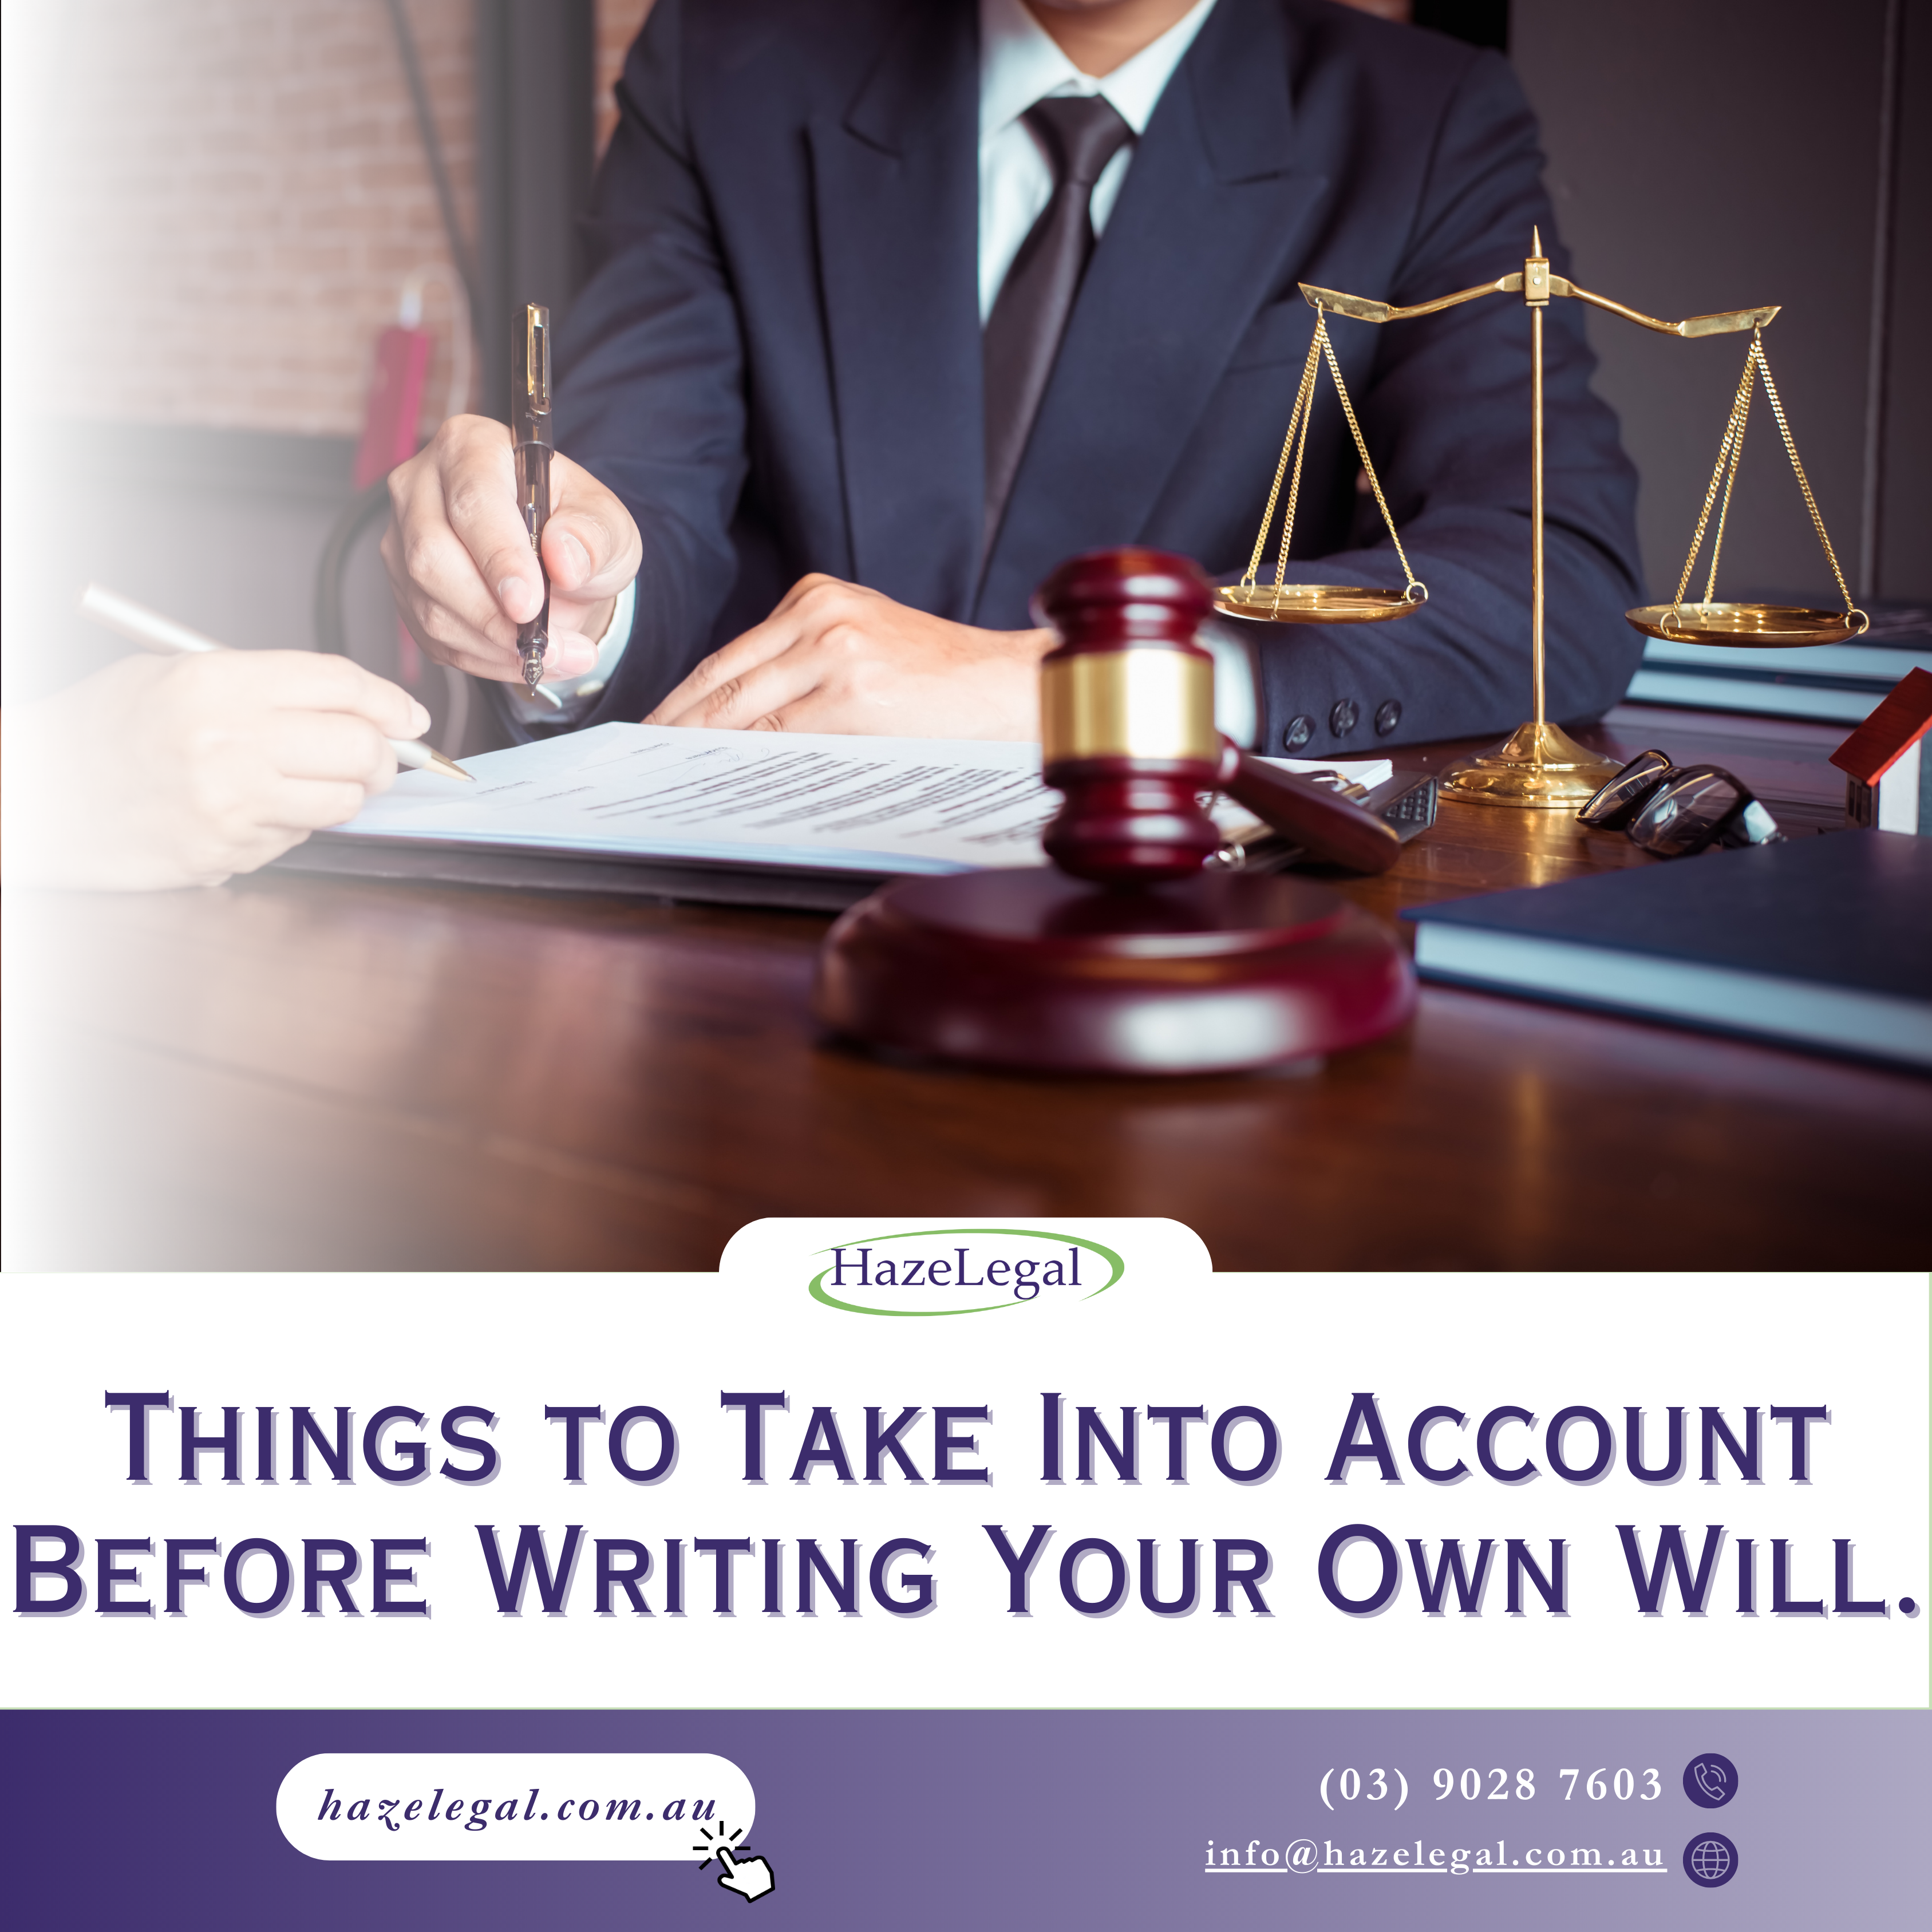 Factors to Consider Before Drafting Your Own Will